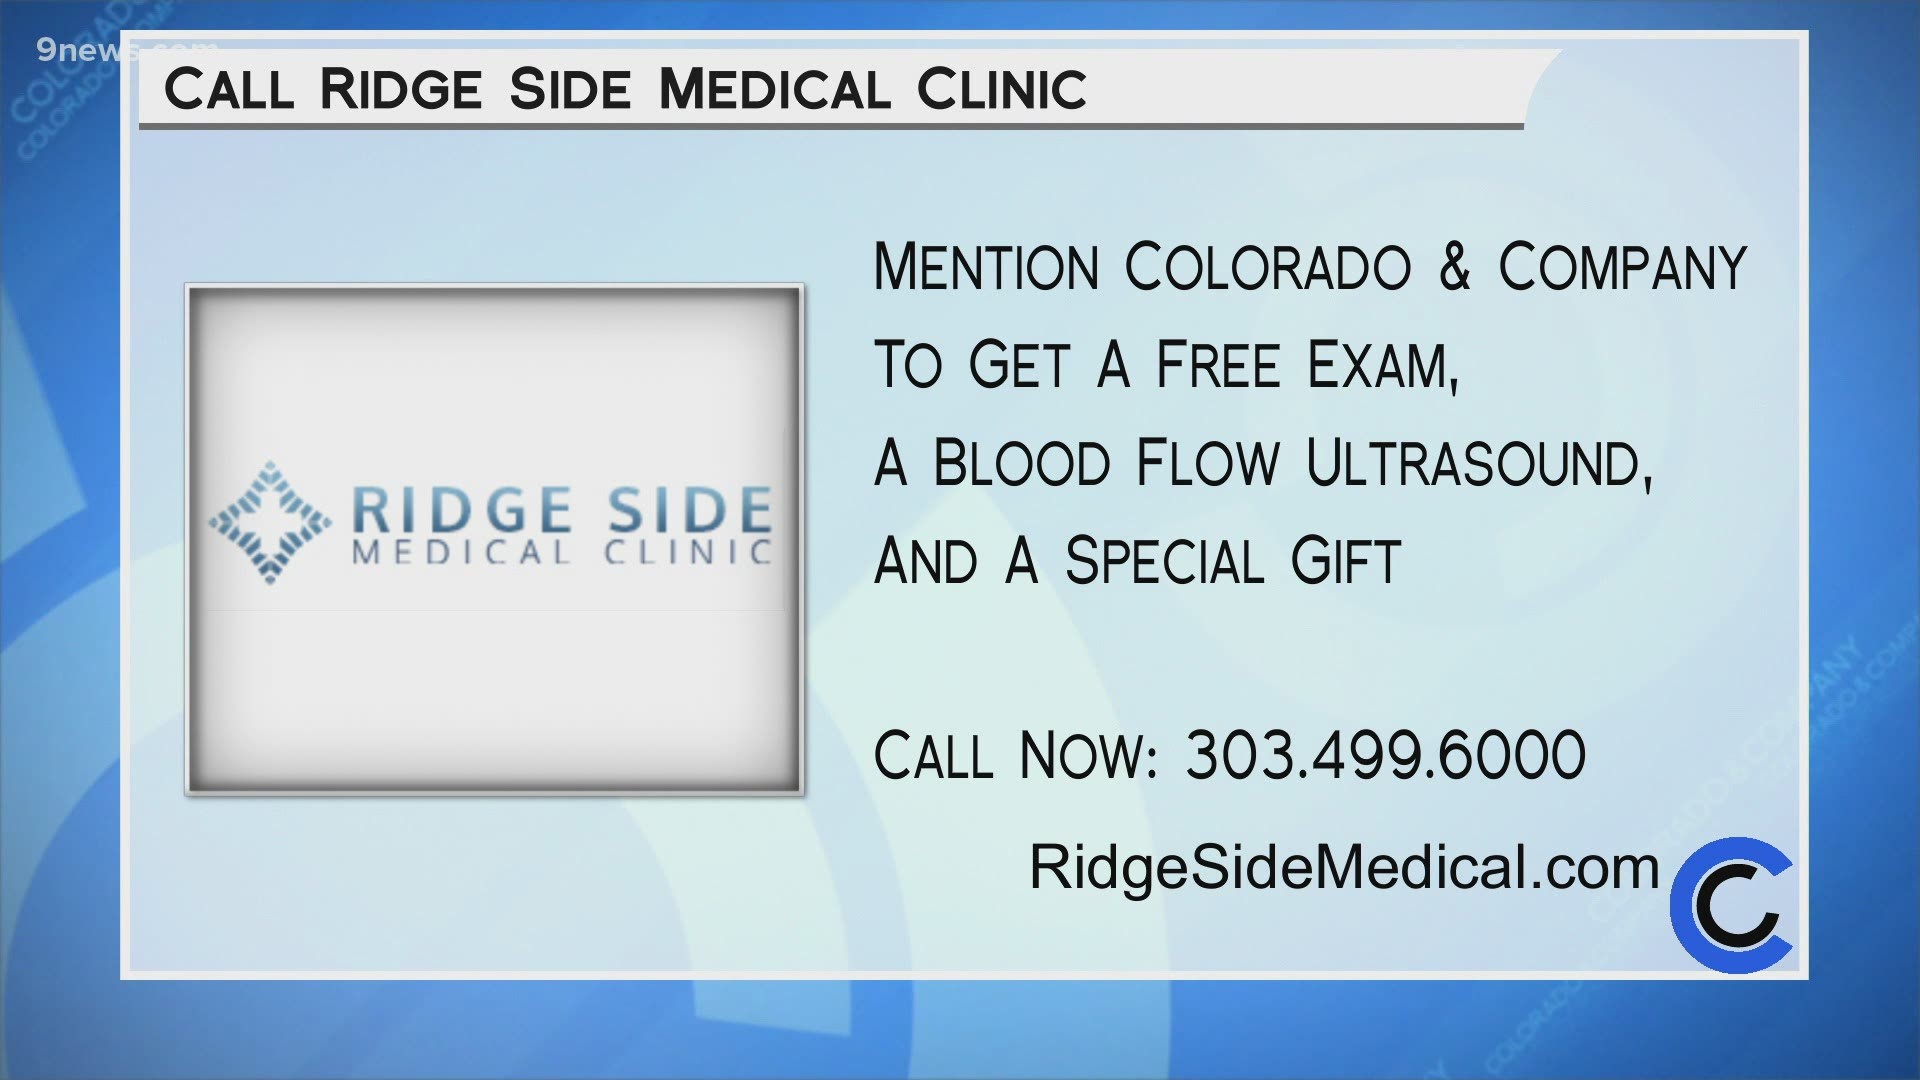 Give Ridge Side Medical Clinic a call at 303.499.6000. Mention COCO and get a free exam, blood flow ultrasound and special gift! Learn more at RidgeSideMedical.com.